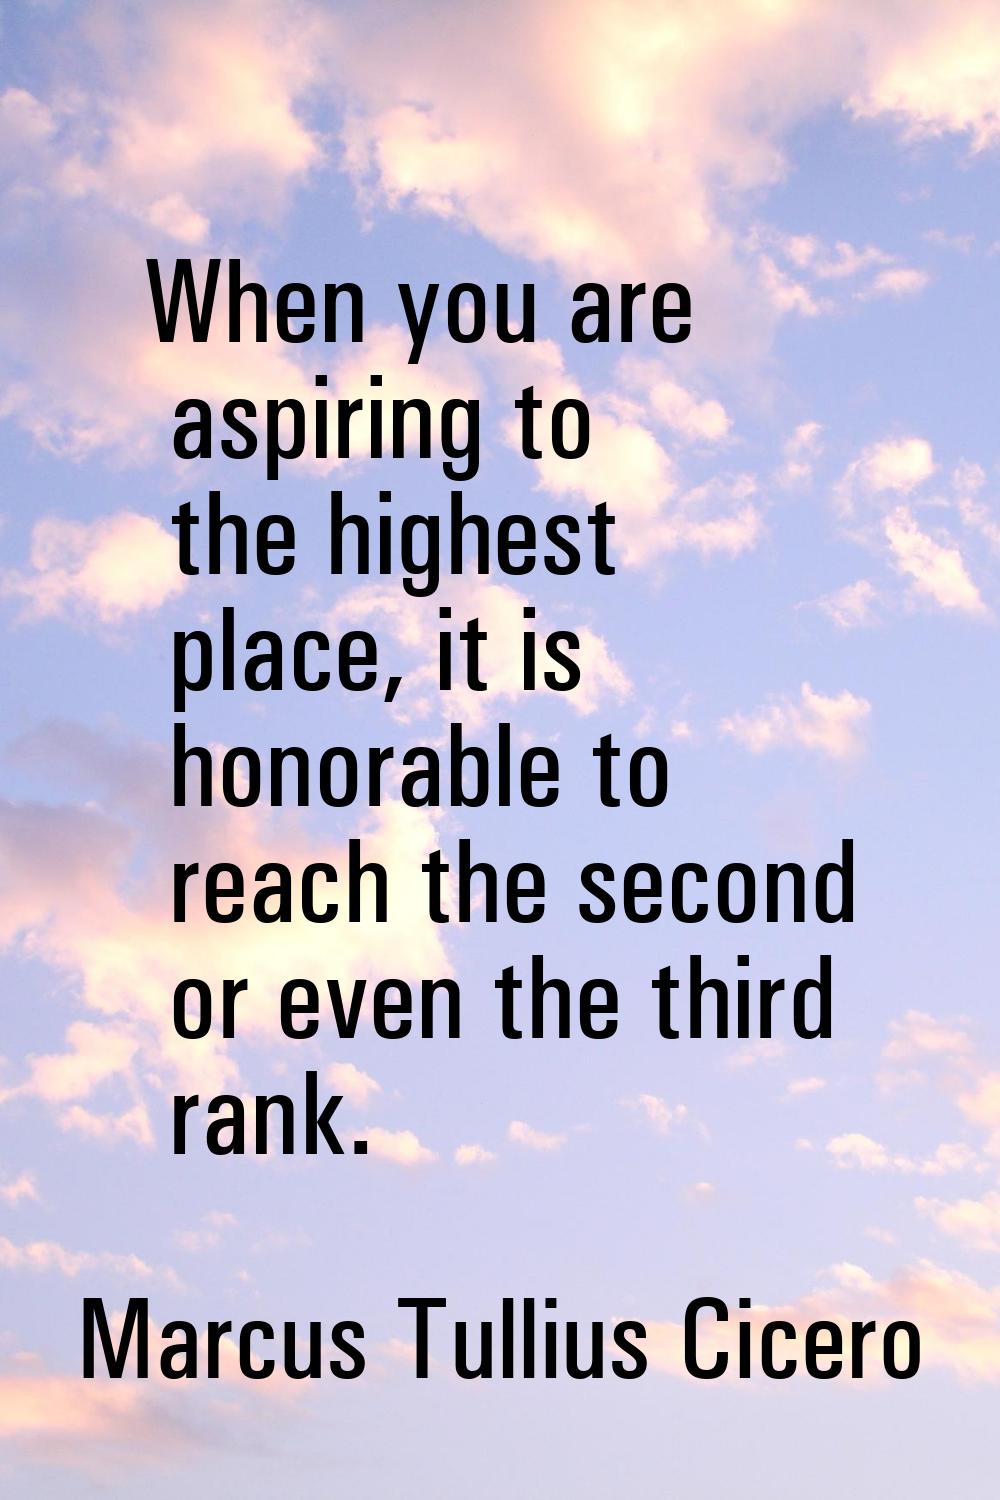 When you are aspiring to the highest place, it is honorable to reach the second or even the third r